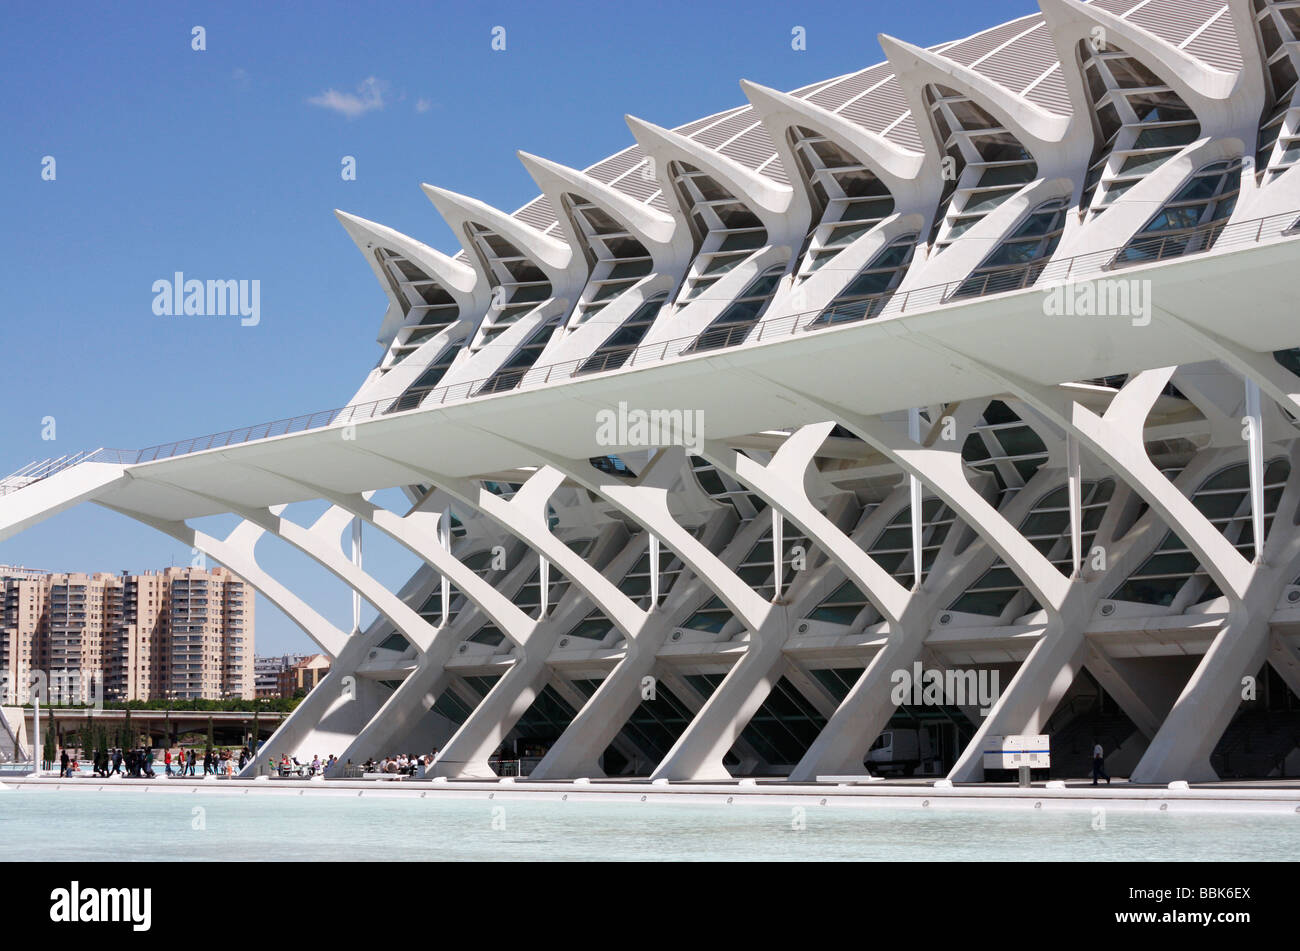 Restaurant at the City of Arts and Sciences park in Valencia,Spain Stock Photo